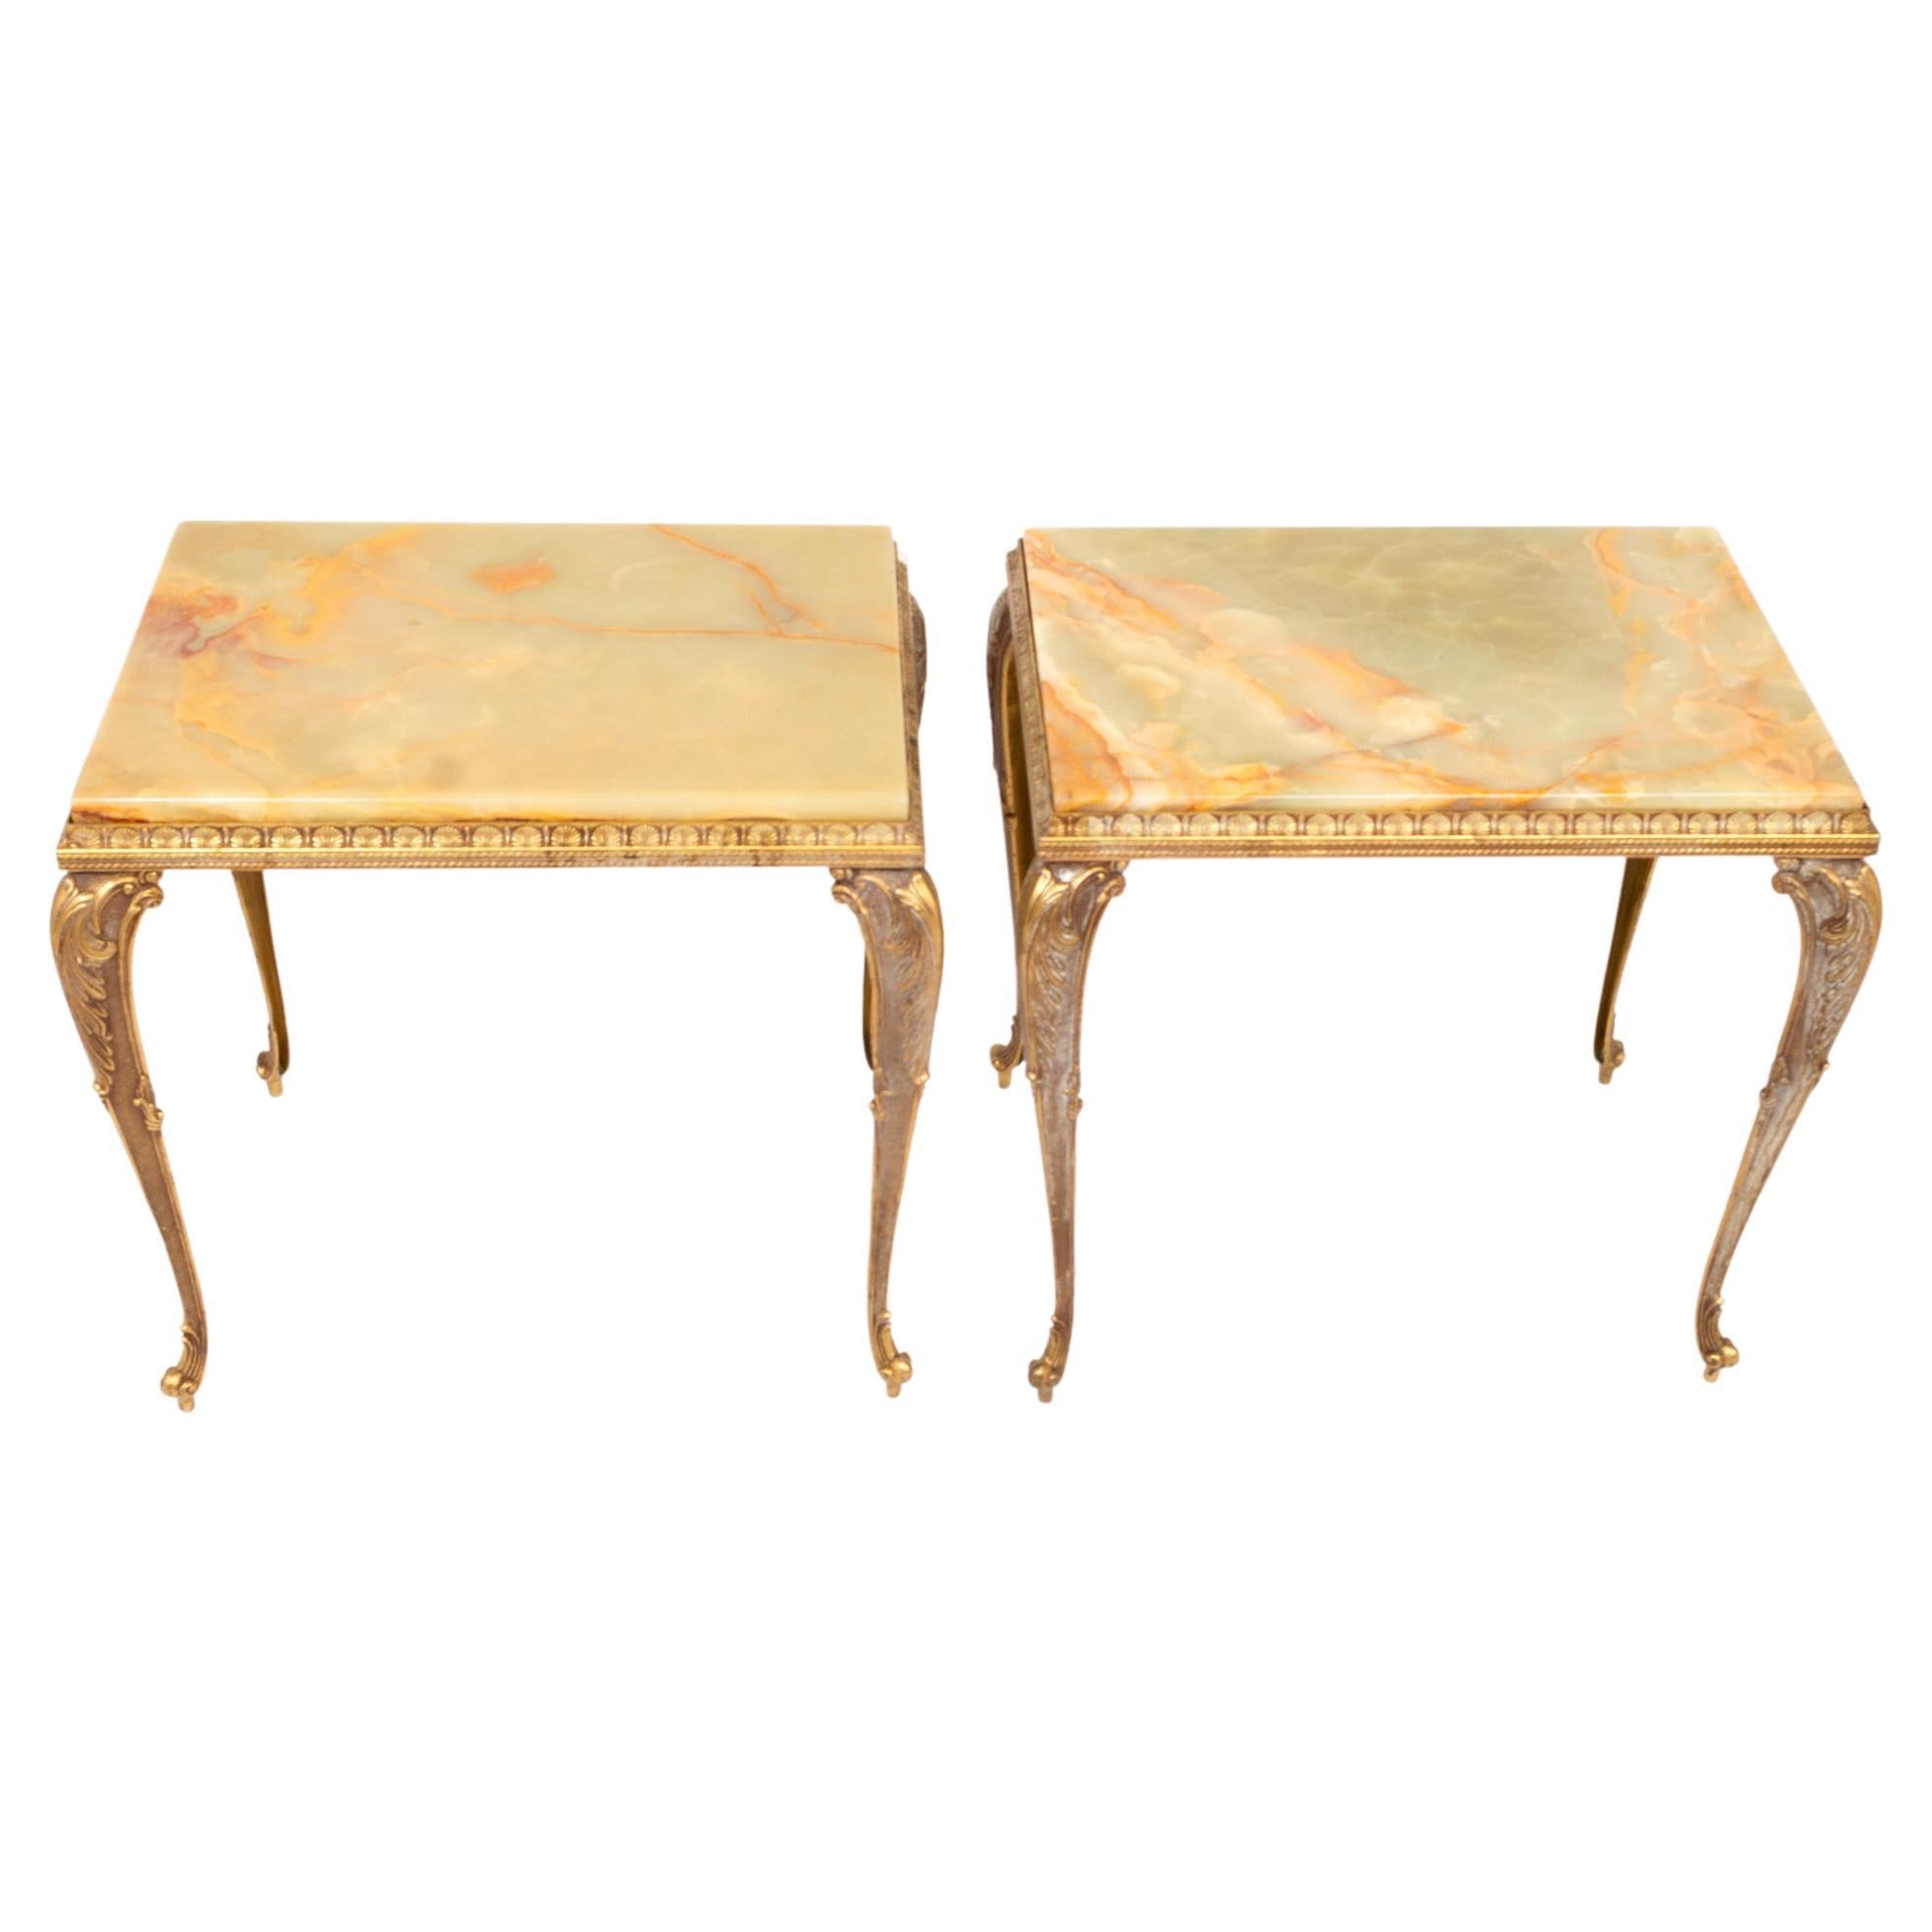 Pair French Gilt Brass and Onyx Side Lamp Tables, c.1940